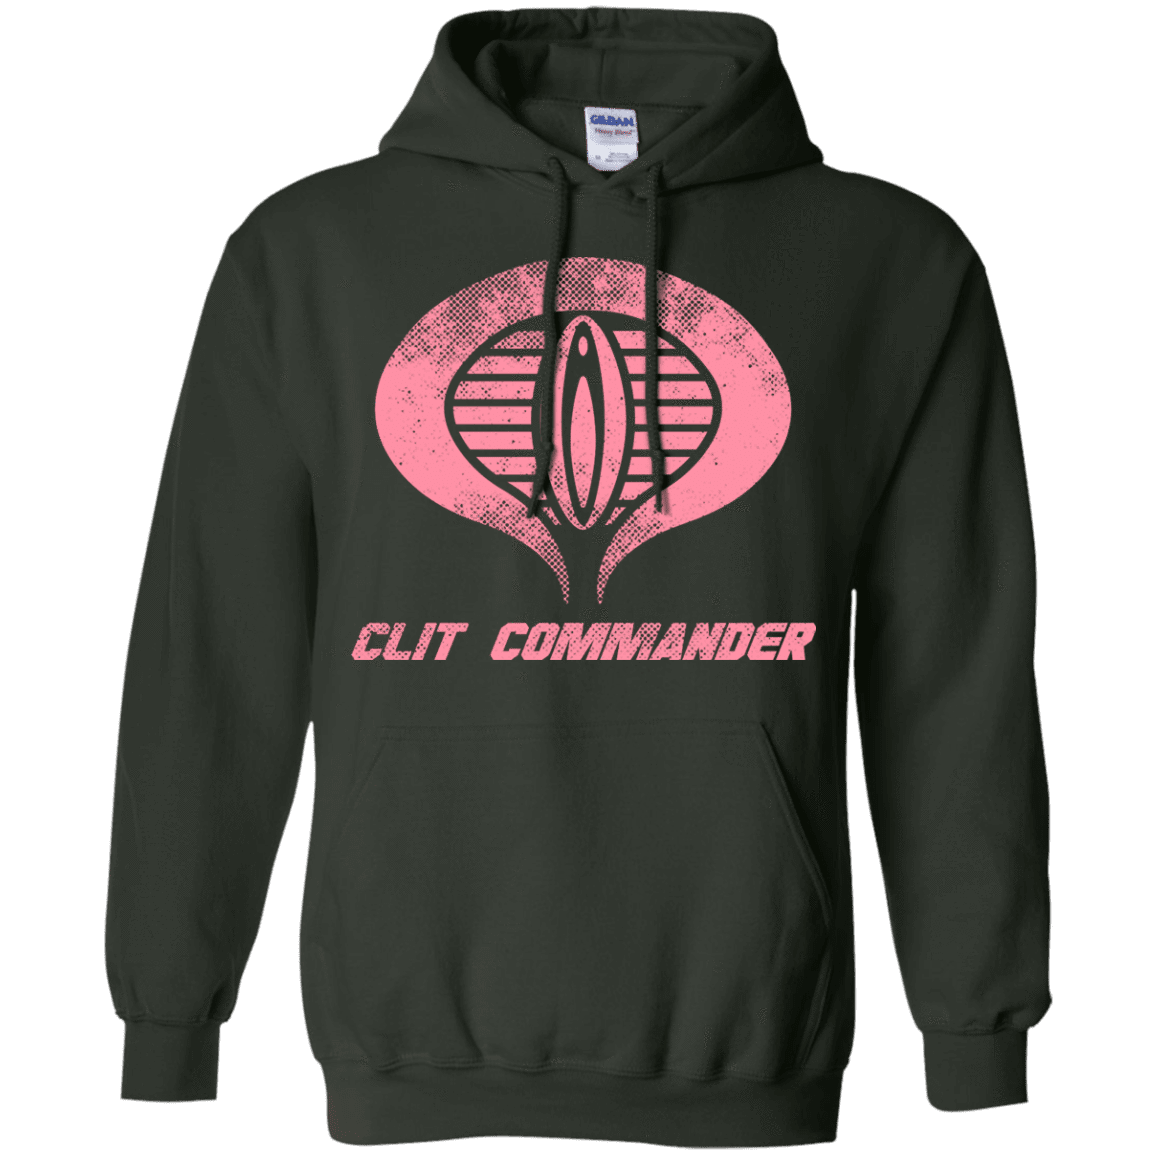 Sweatshirts Forest Green / Small Clit Commander Pullover Hoodie